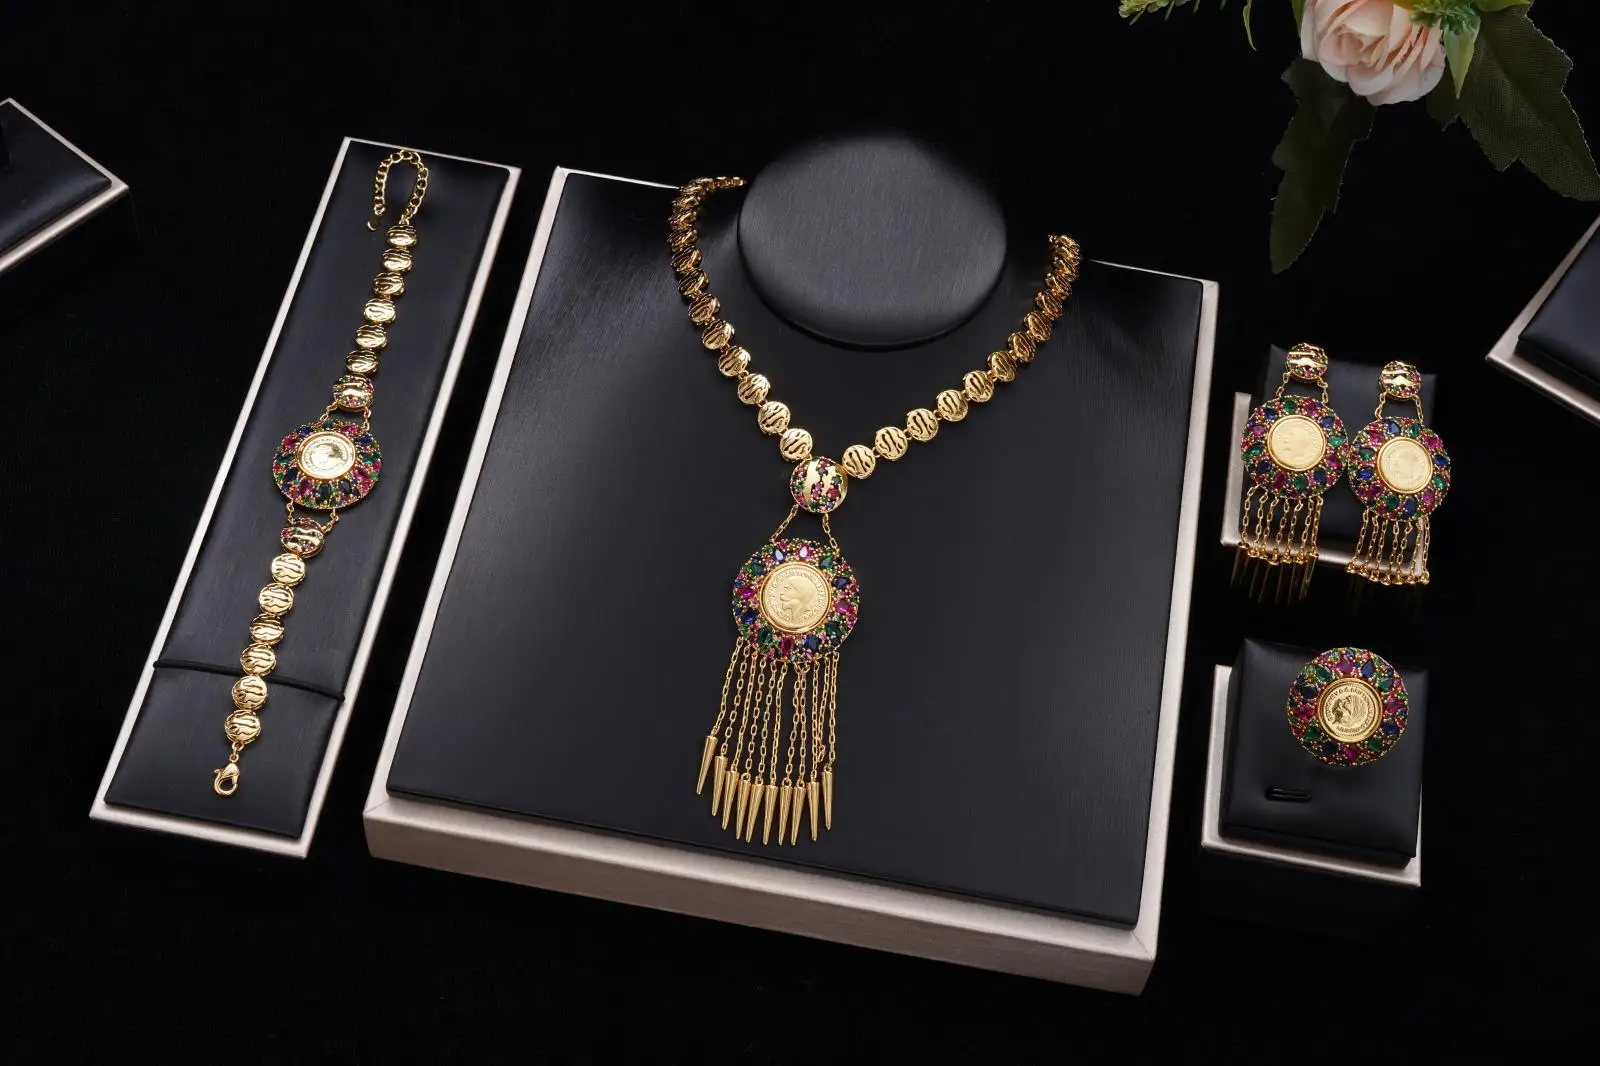 

Algeria Africa JEWELRY Libya Dubai Hot Sale 24k Gold Plated Wedding Bridal Jewelry Sets For Women Perfect Gift for Parties